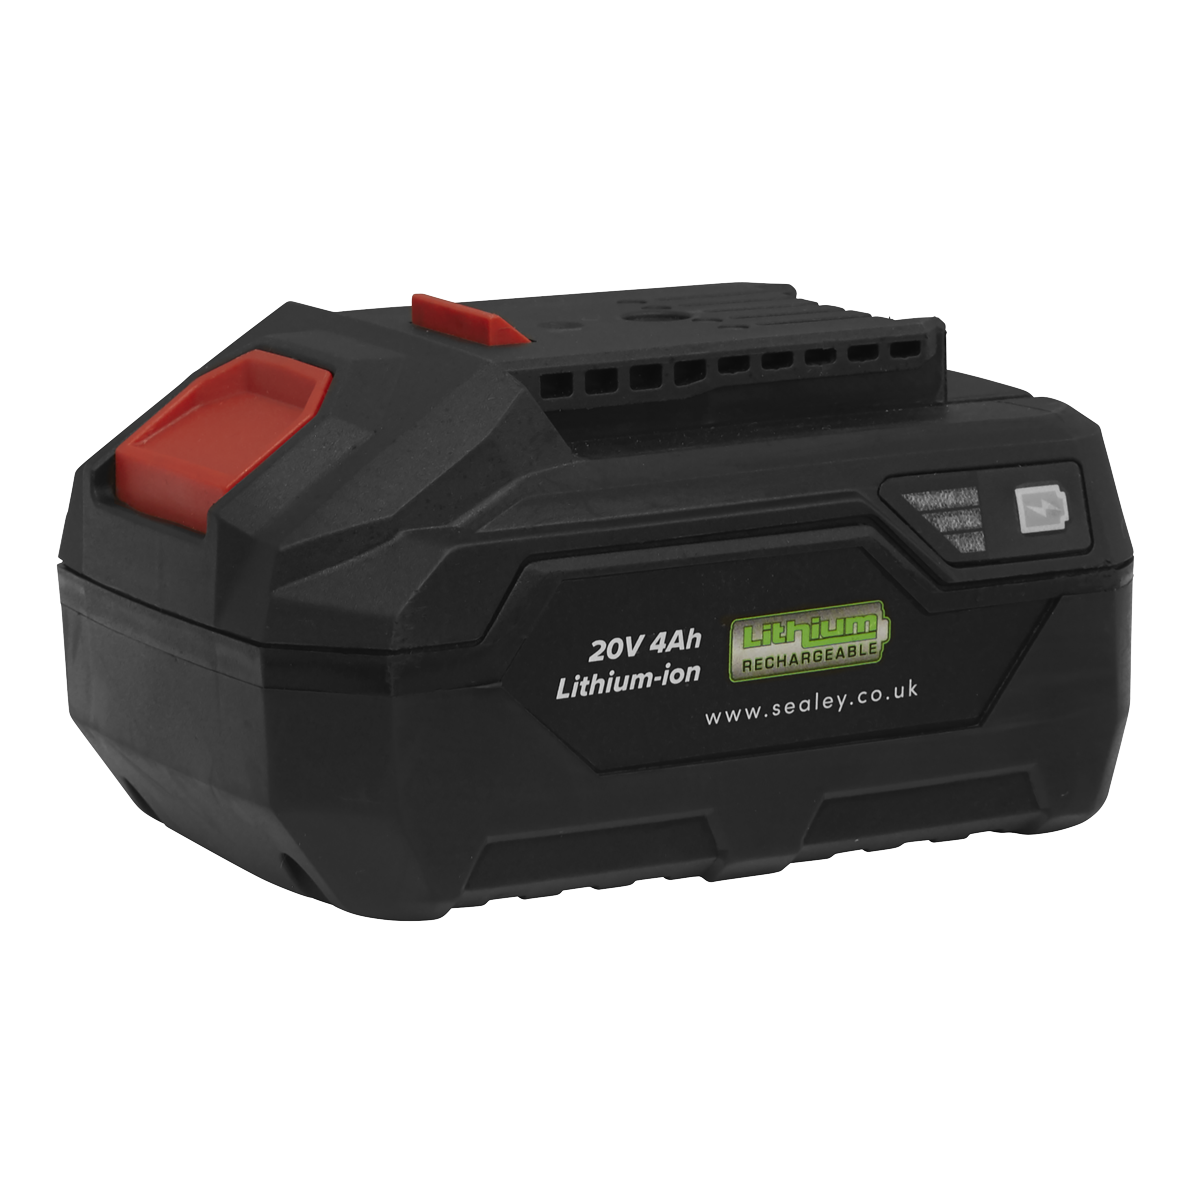 CP20VBP4 - Power Tool Battery 20V 4Ah Lithium-ion for SV20 Series